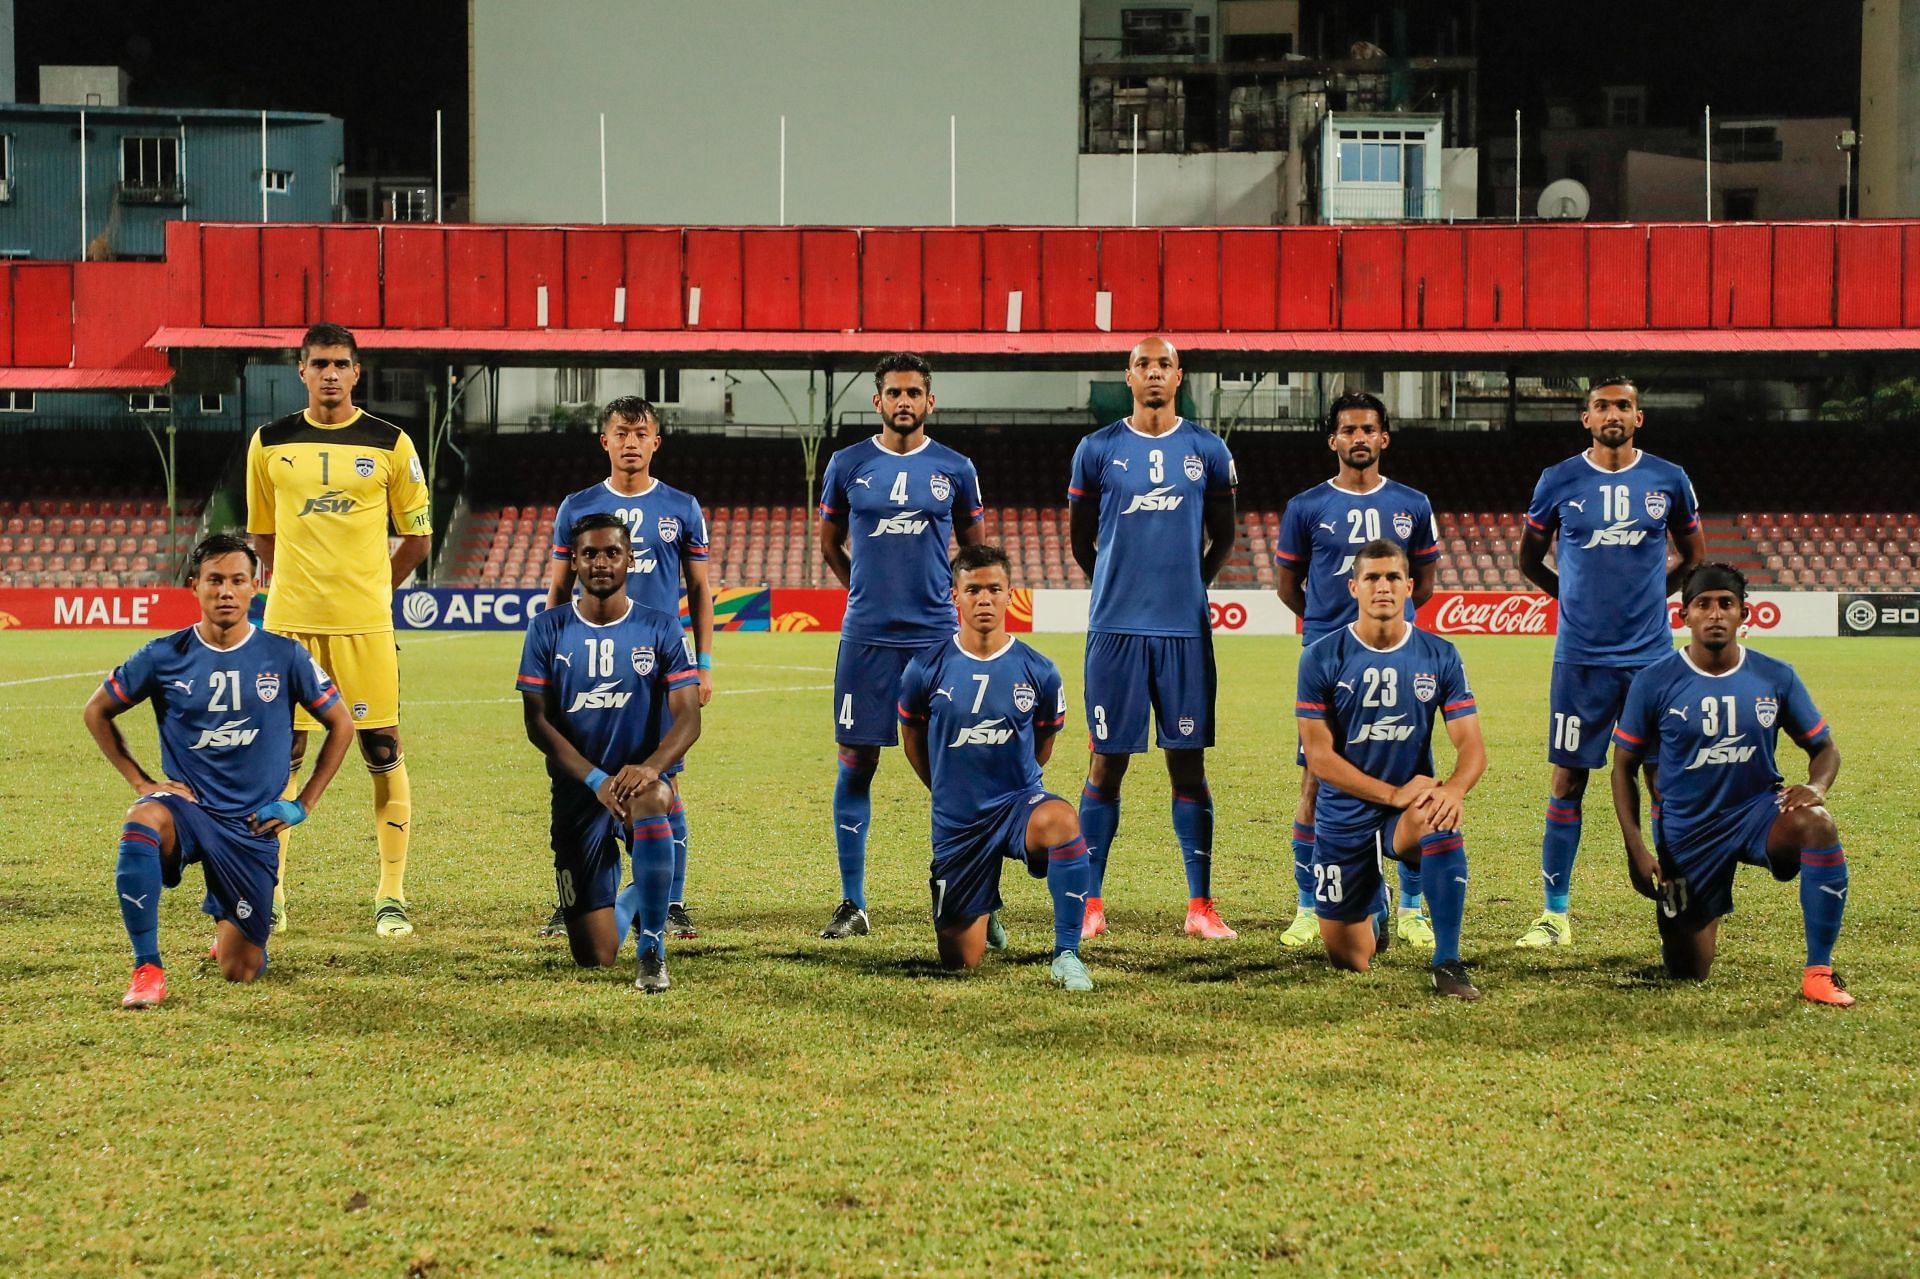 Bengaluru FC started their campaign with a victory